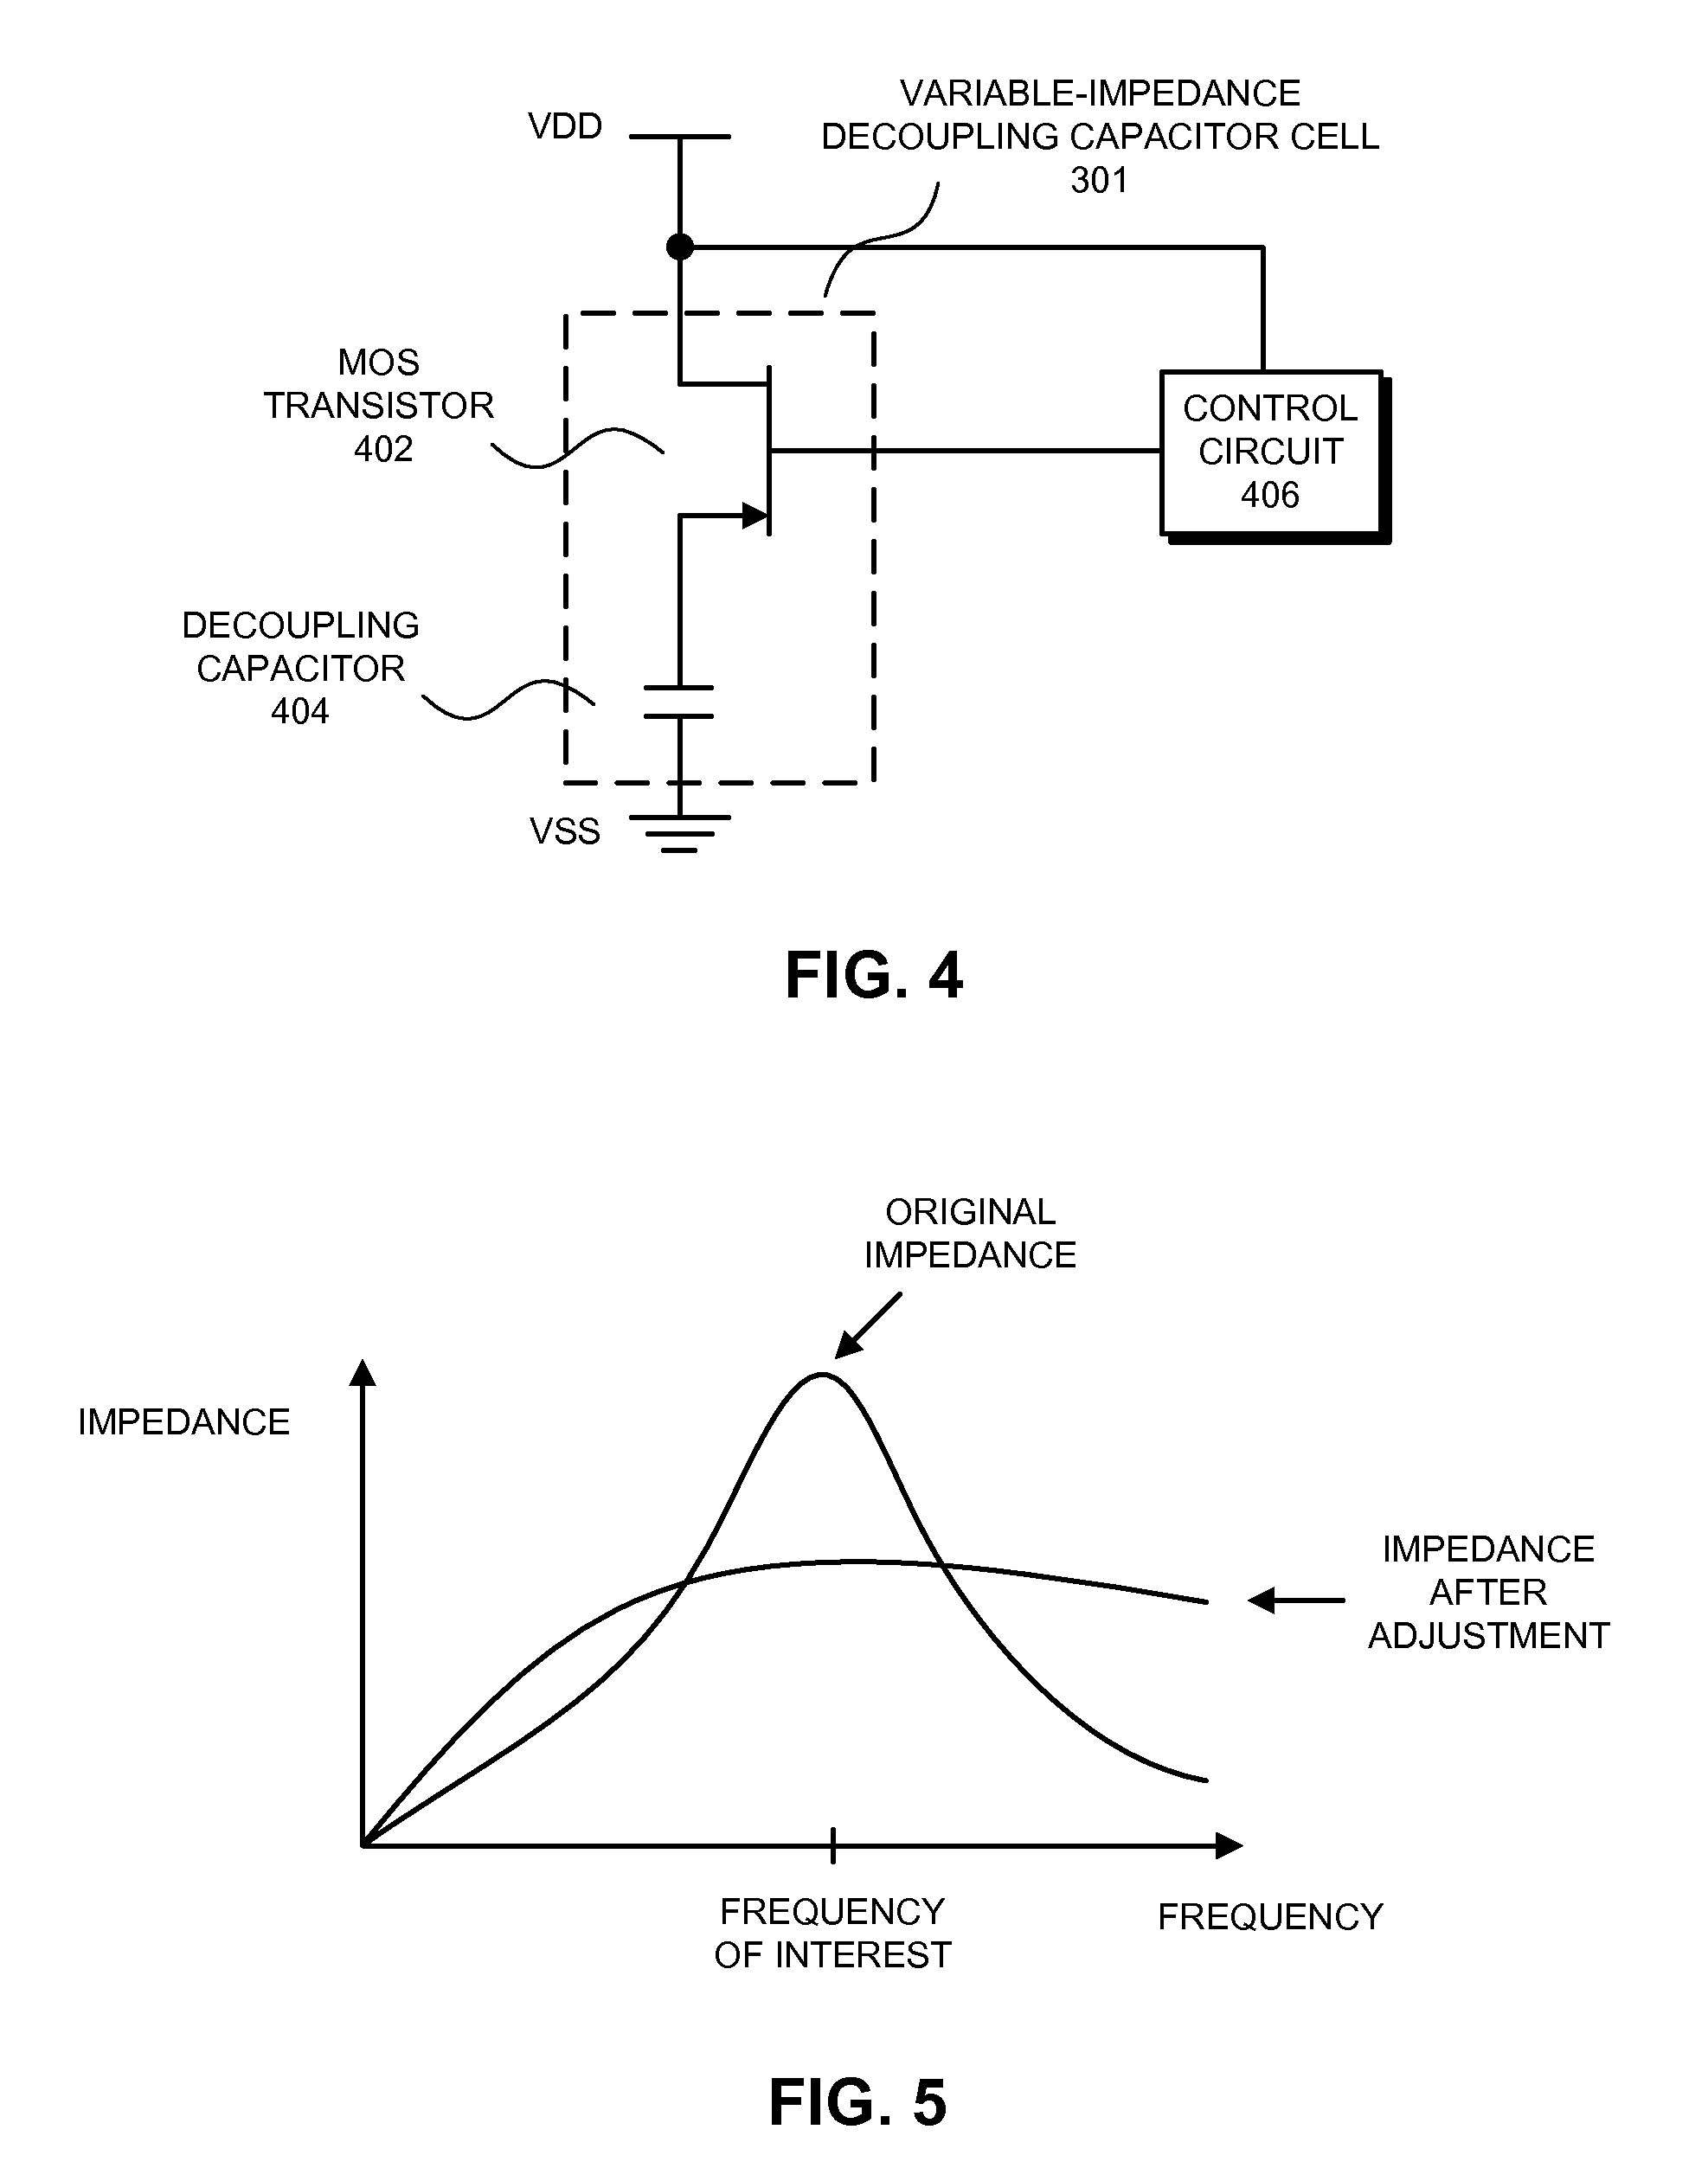 Variable-impedance gated decoupling cell